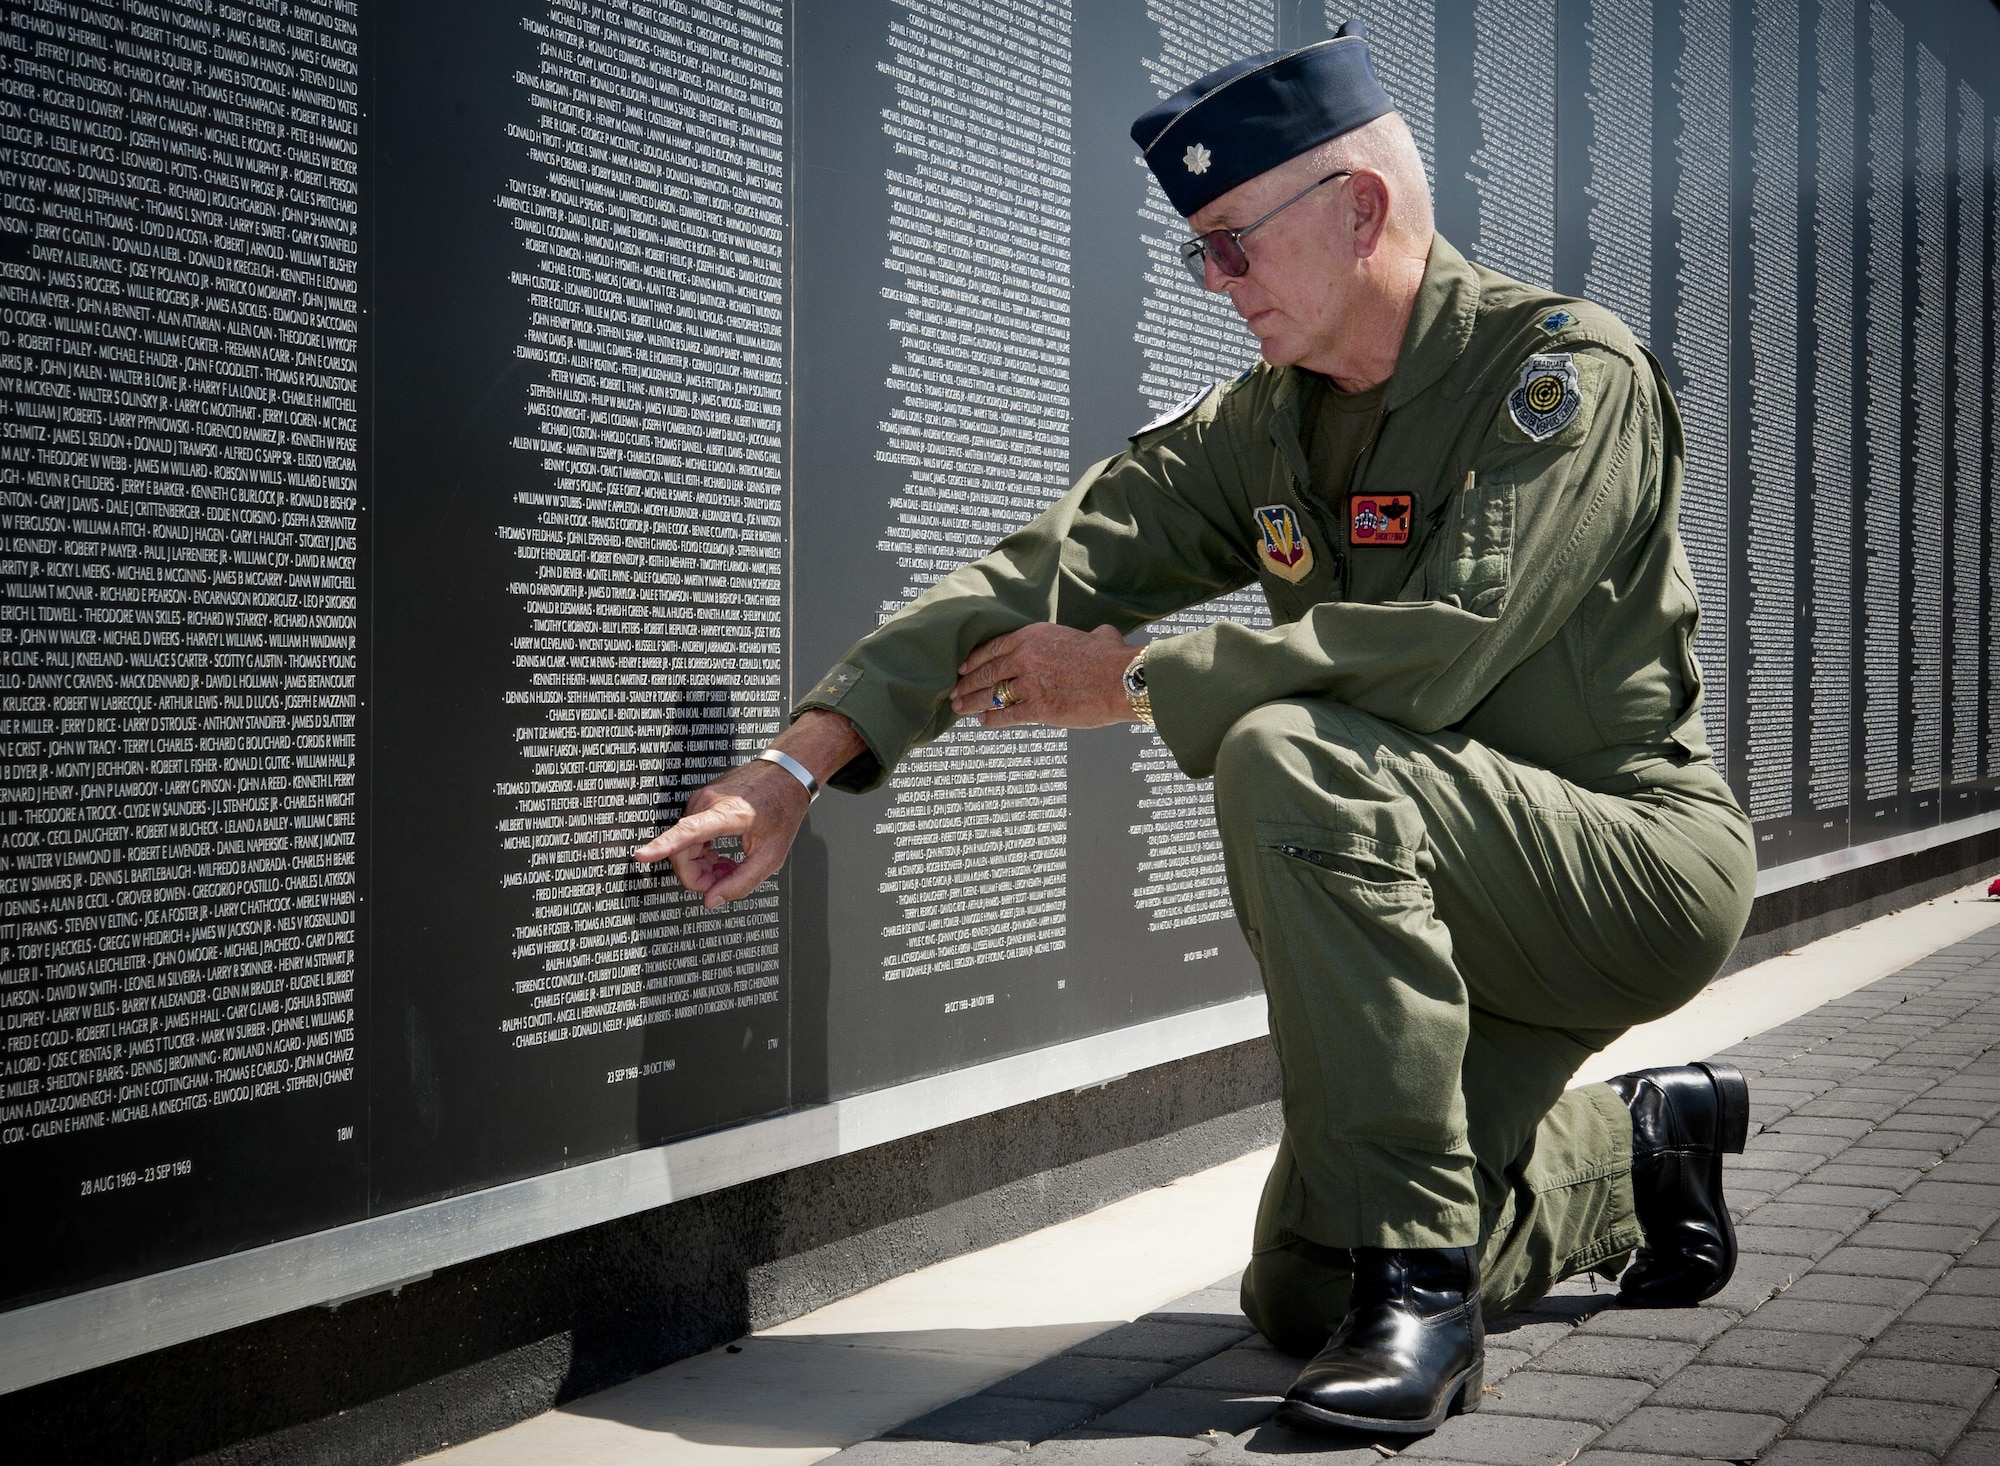 Retired Lt. Col. Bill "Shortfinger" Schwertgege, an F-4 Phantom pilot and Vietnam War POW, points to Neil S. Bynums Name on the Woodring Wall of Honor, at Woodring Regional Airport, Enid Oklahoma. The Woodring Wall was won of the two traveling Vietnam War Memorial Walls. it is a 90 percent replica of the original memorial in Washington D.C. it found a permenant home in Enid in 2013. Schwertfeger served with Bynum, who is still missing in action in Vietnam, and wears Bynum's POW/MIA bracelet. (U.S. Air Force photo/Staff Sgt. James Bolinger)